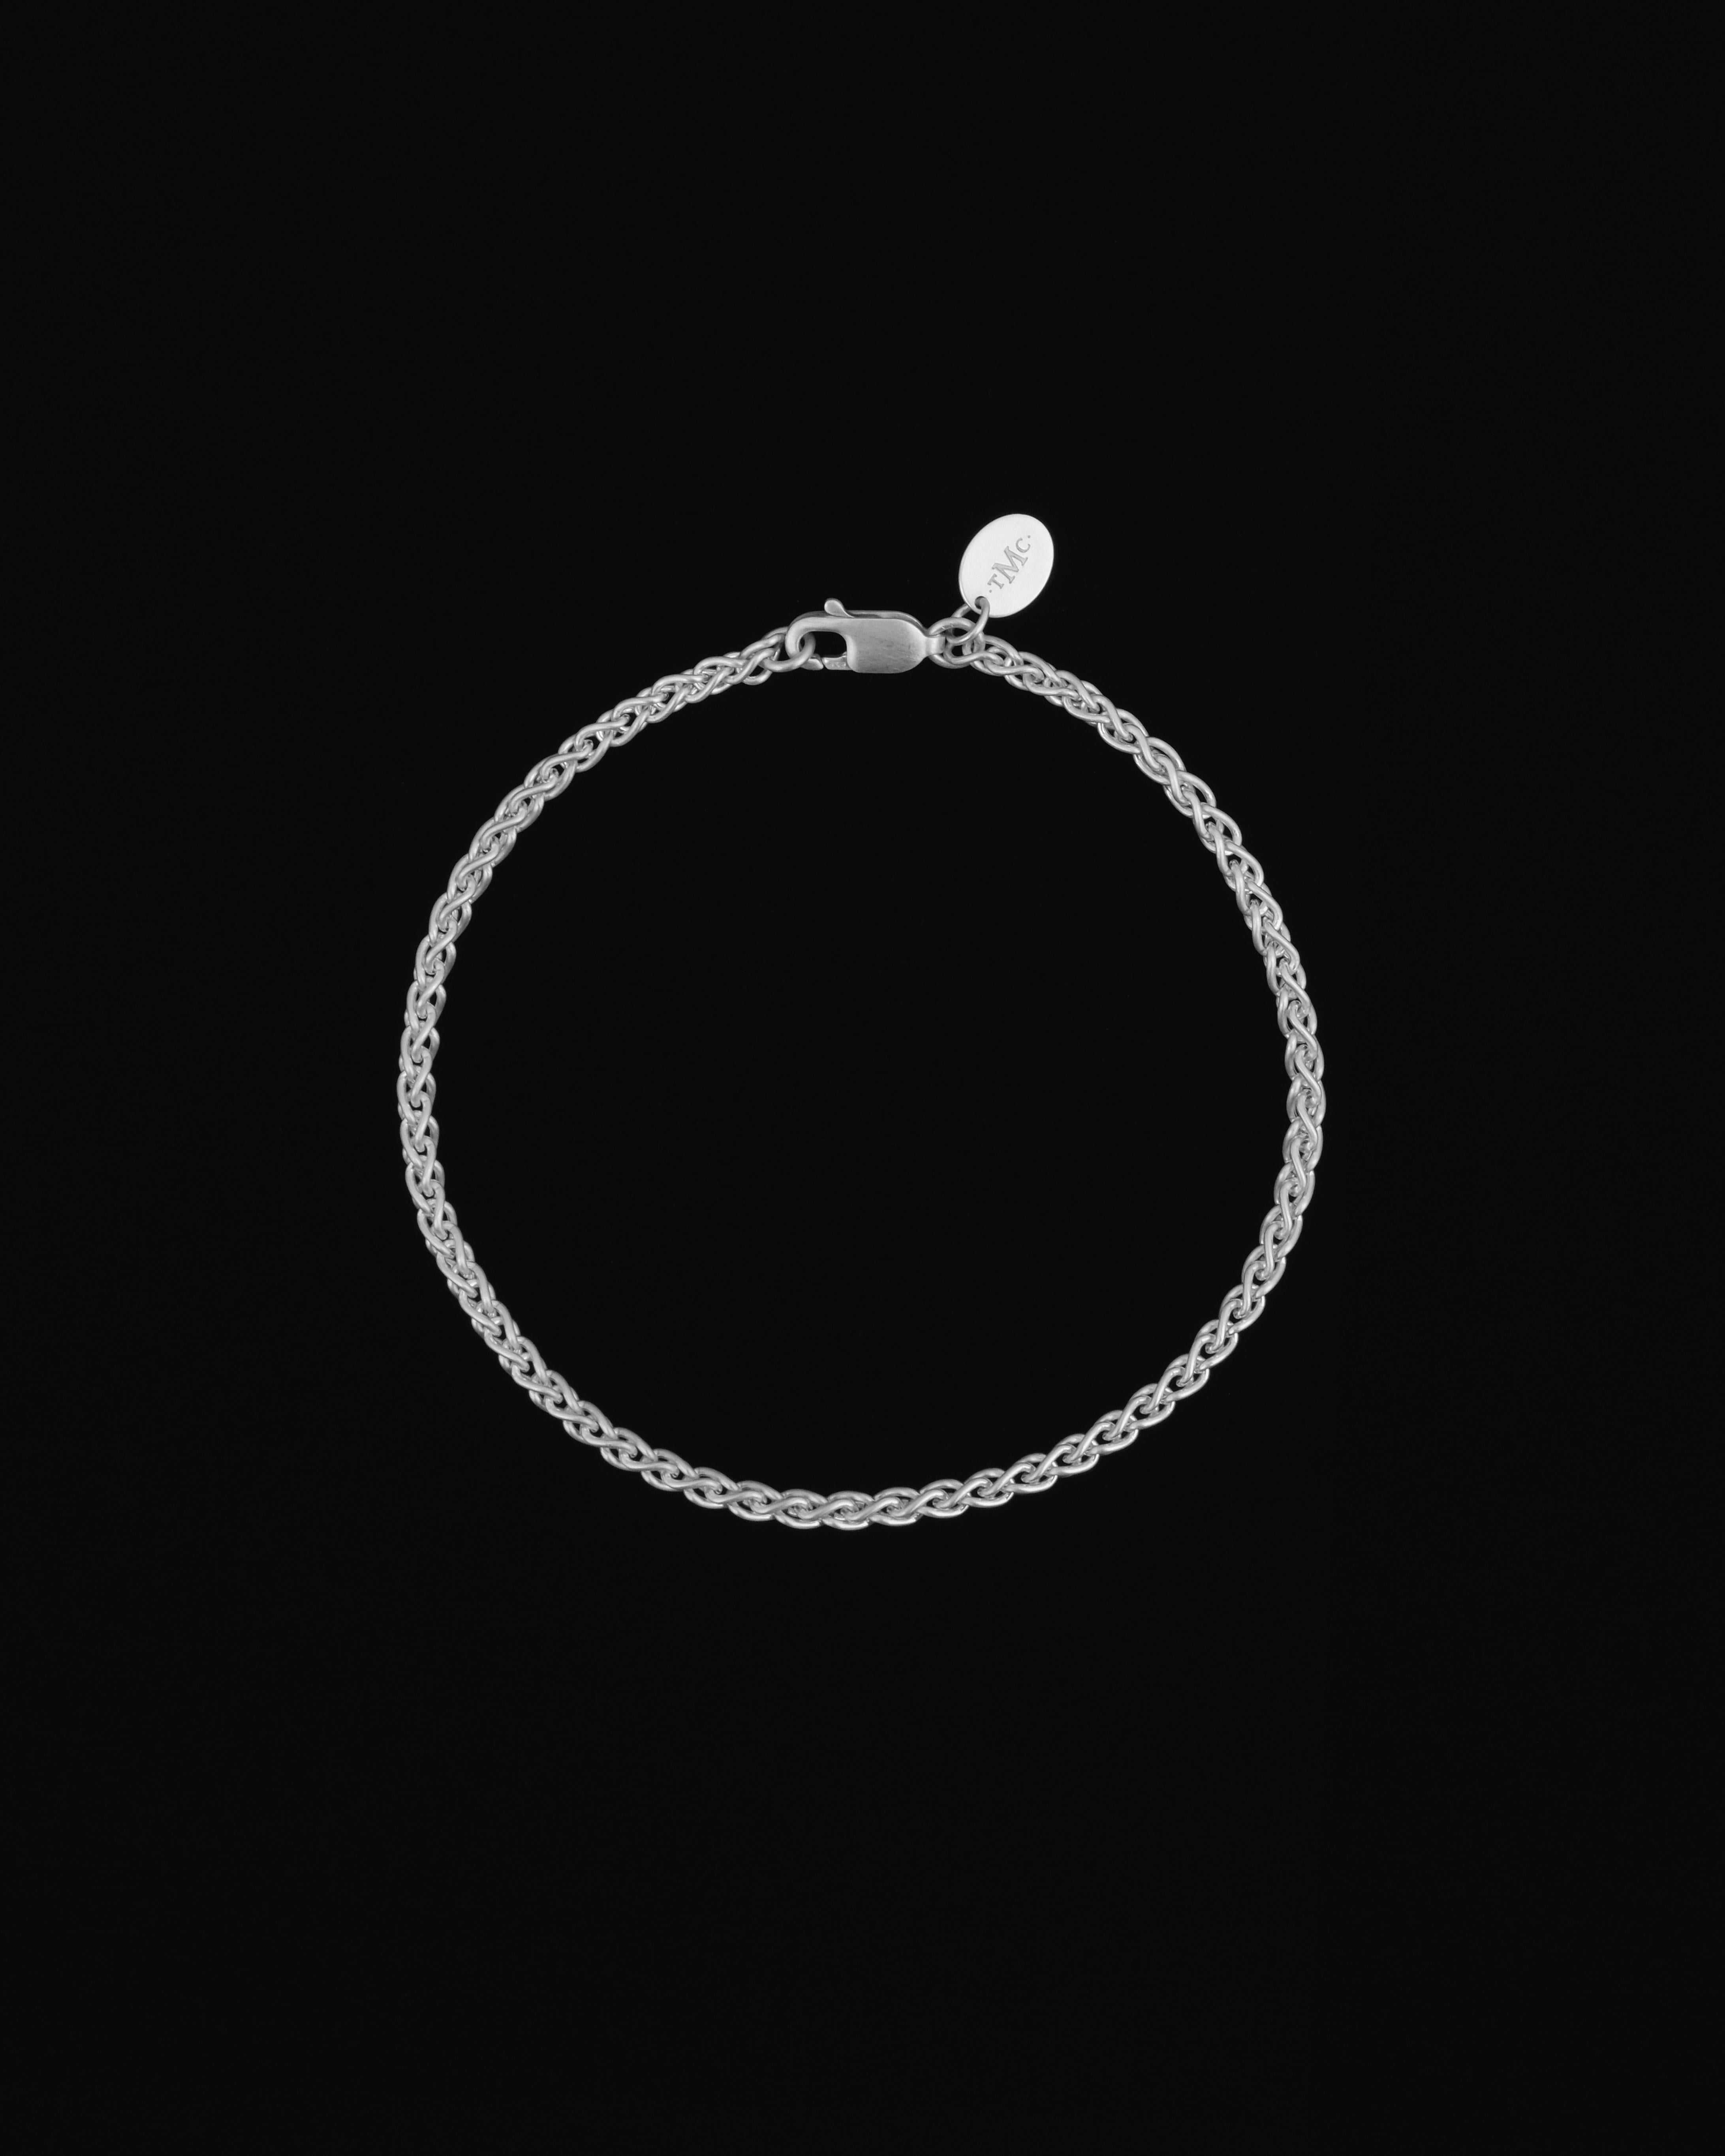 Artisan Tiana Marie Combes White Gold Woven Chain Bracelet For Sale